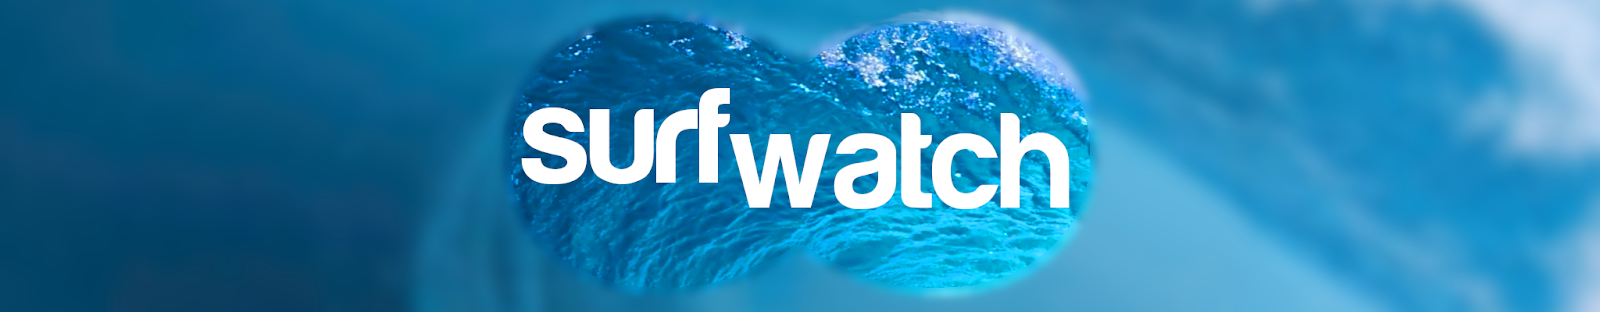 SurfWatch...Who's watching the waves?